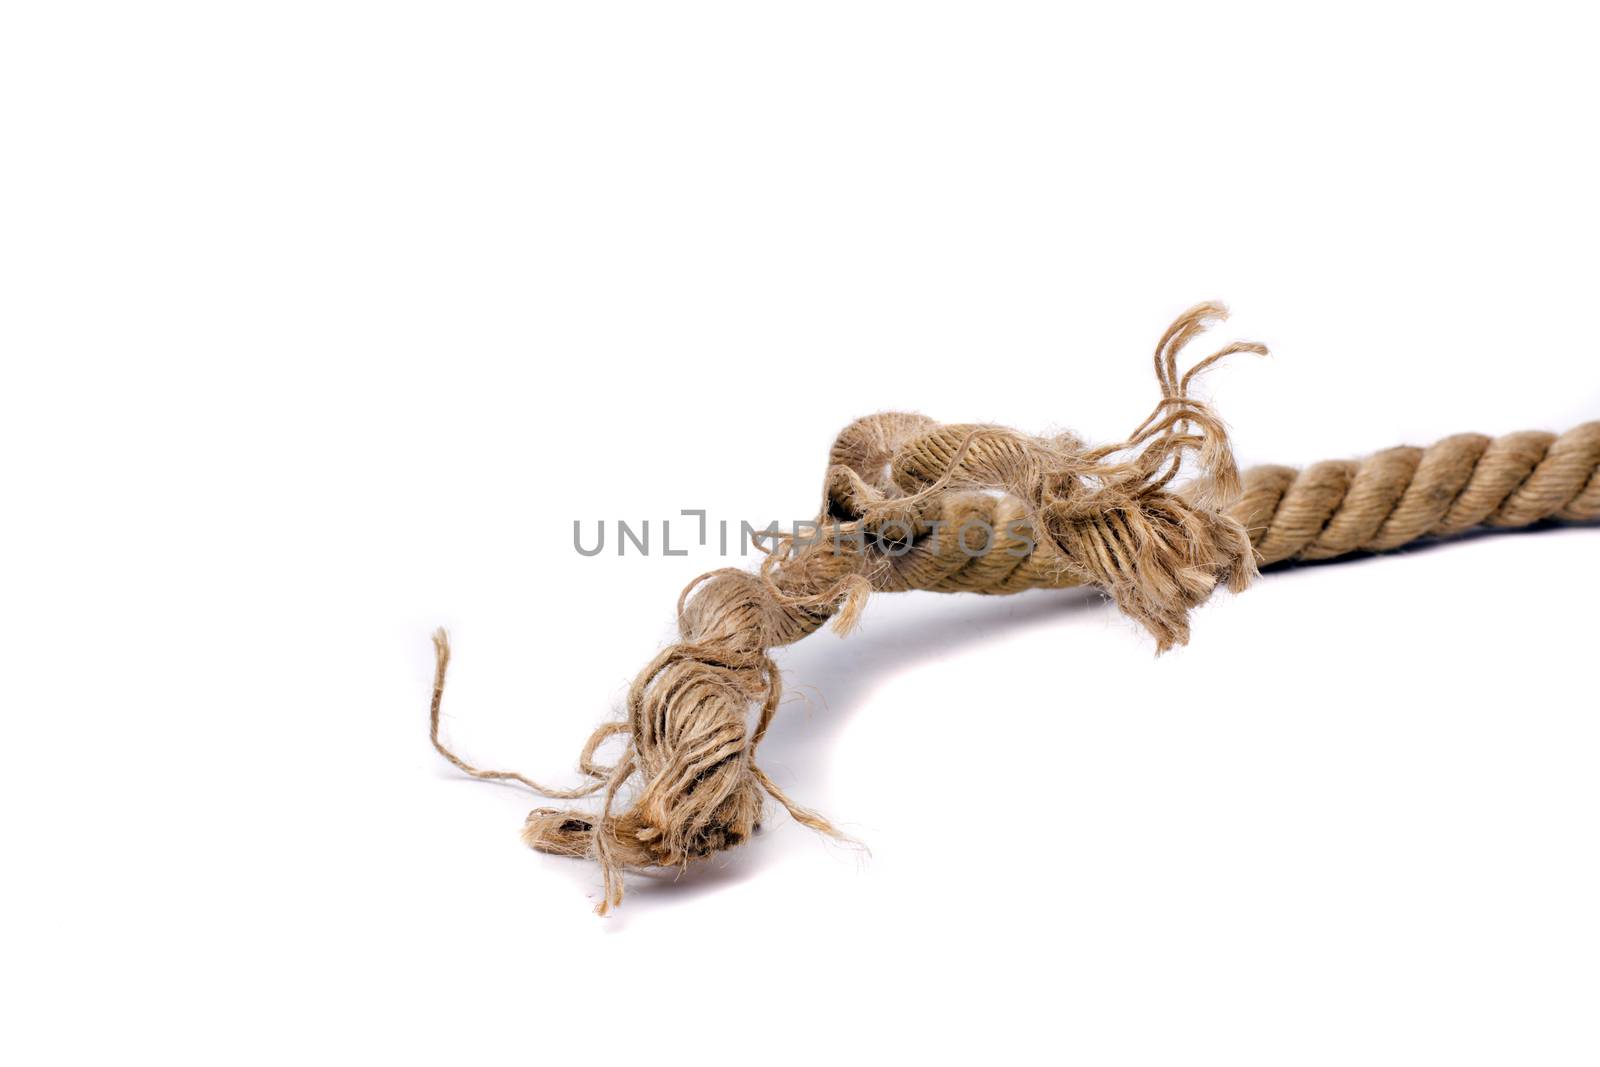 ship rope and knot isolated on white background